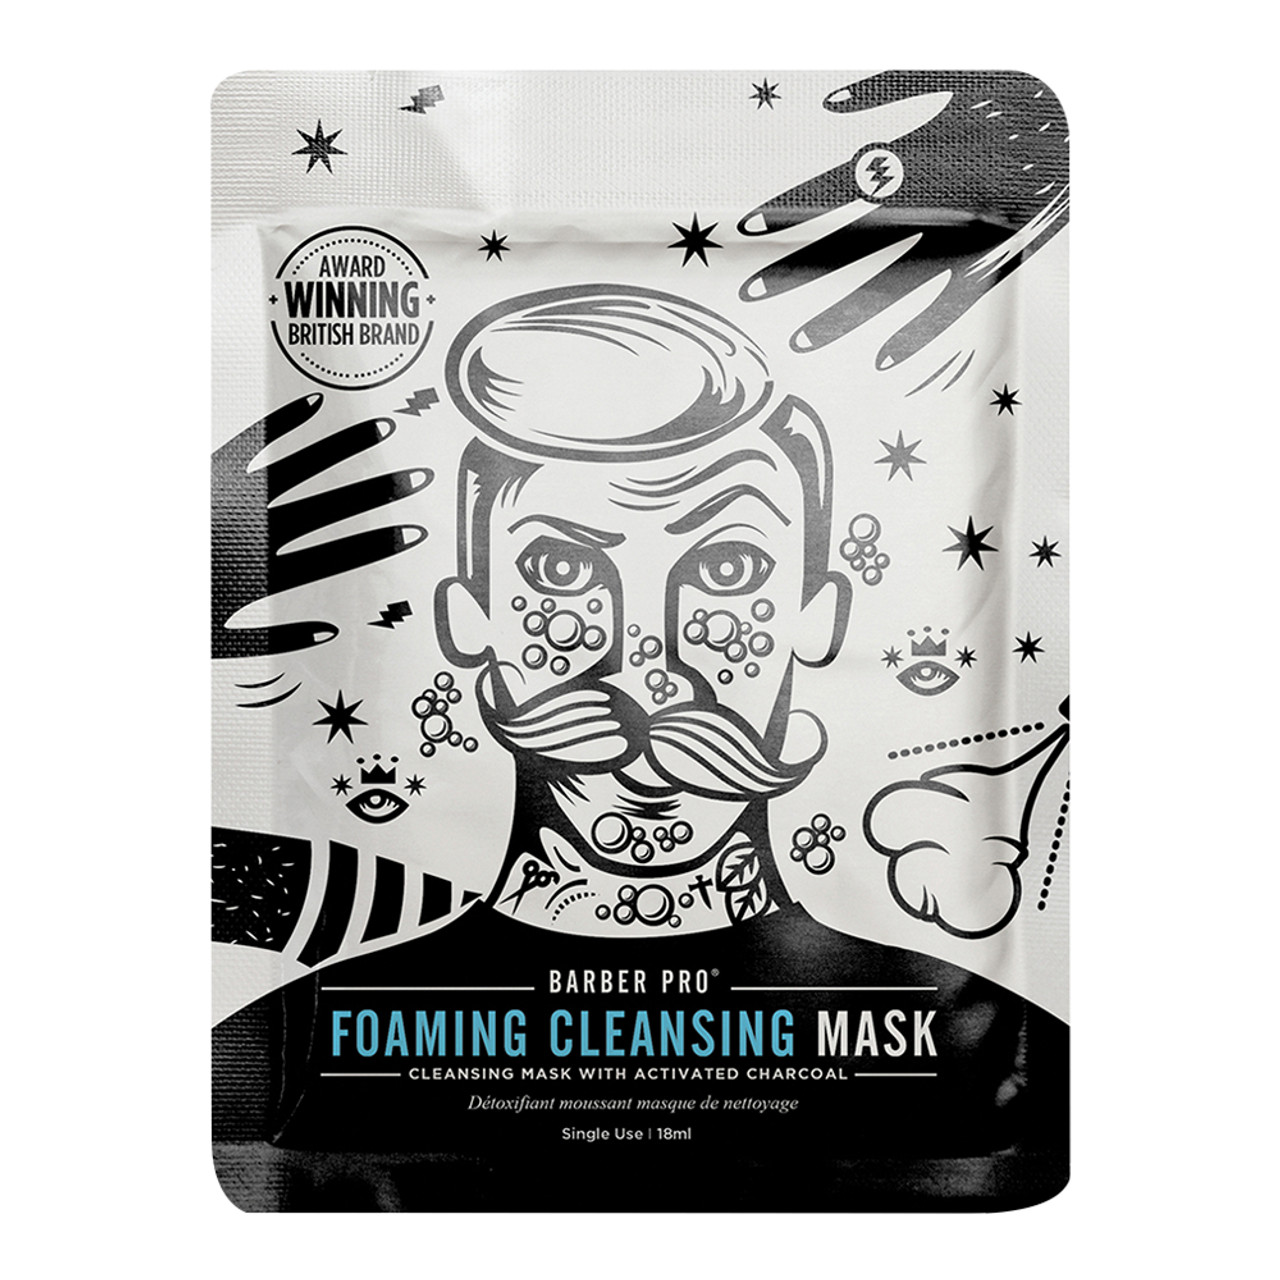 Barber Pro Foaming Cleansing Mask 20ml RRP 5 CLEARANCE XL 3.99